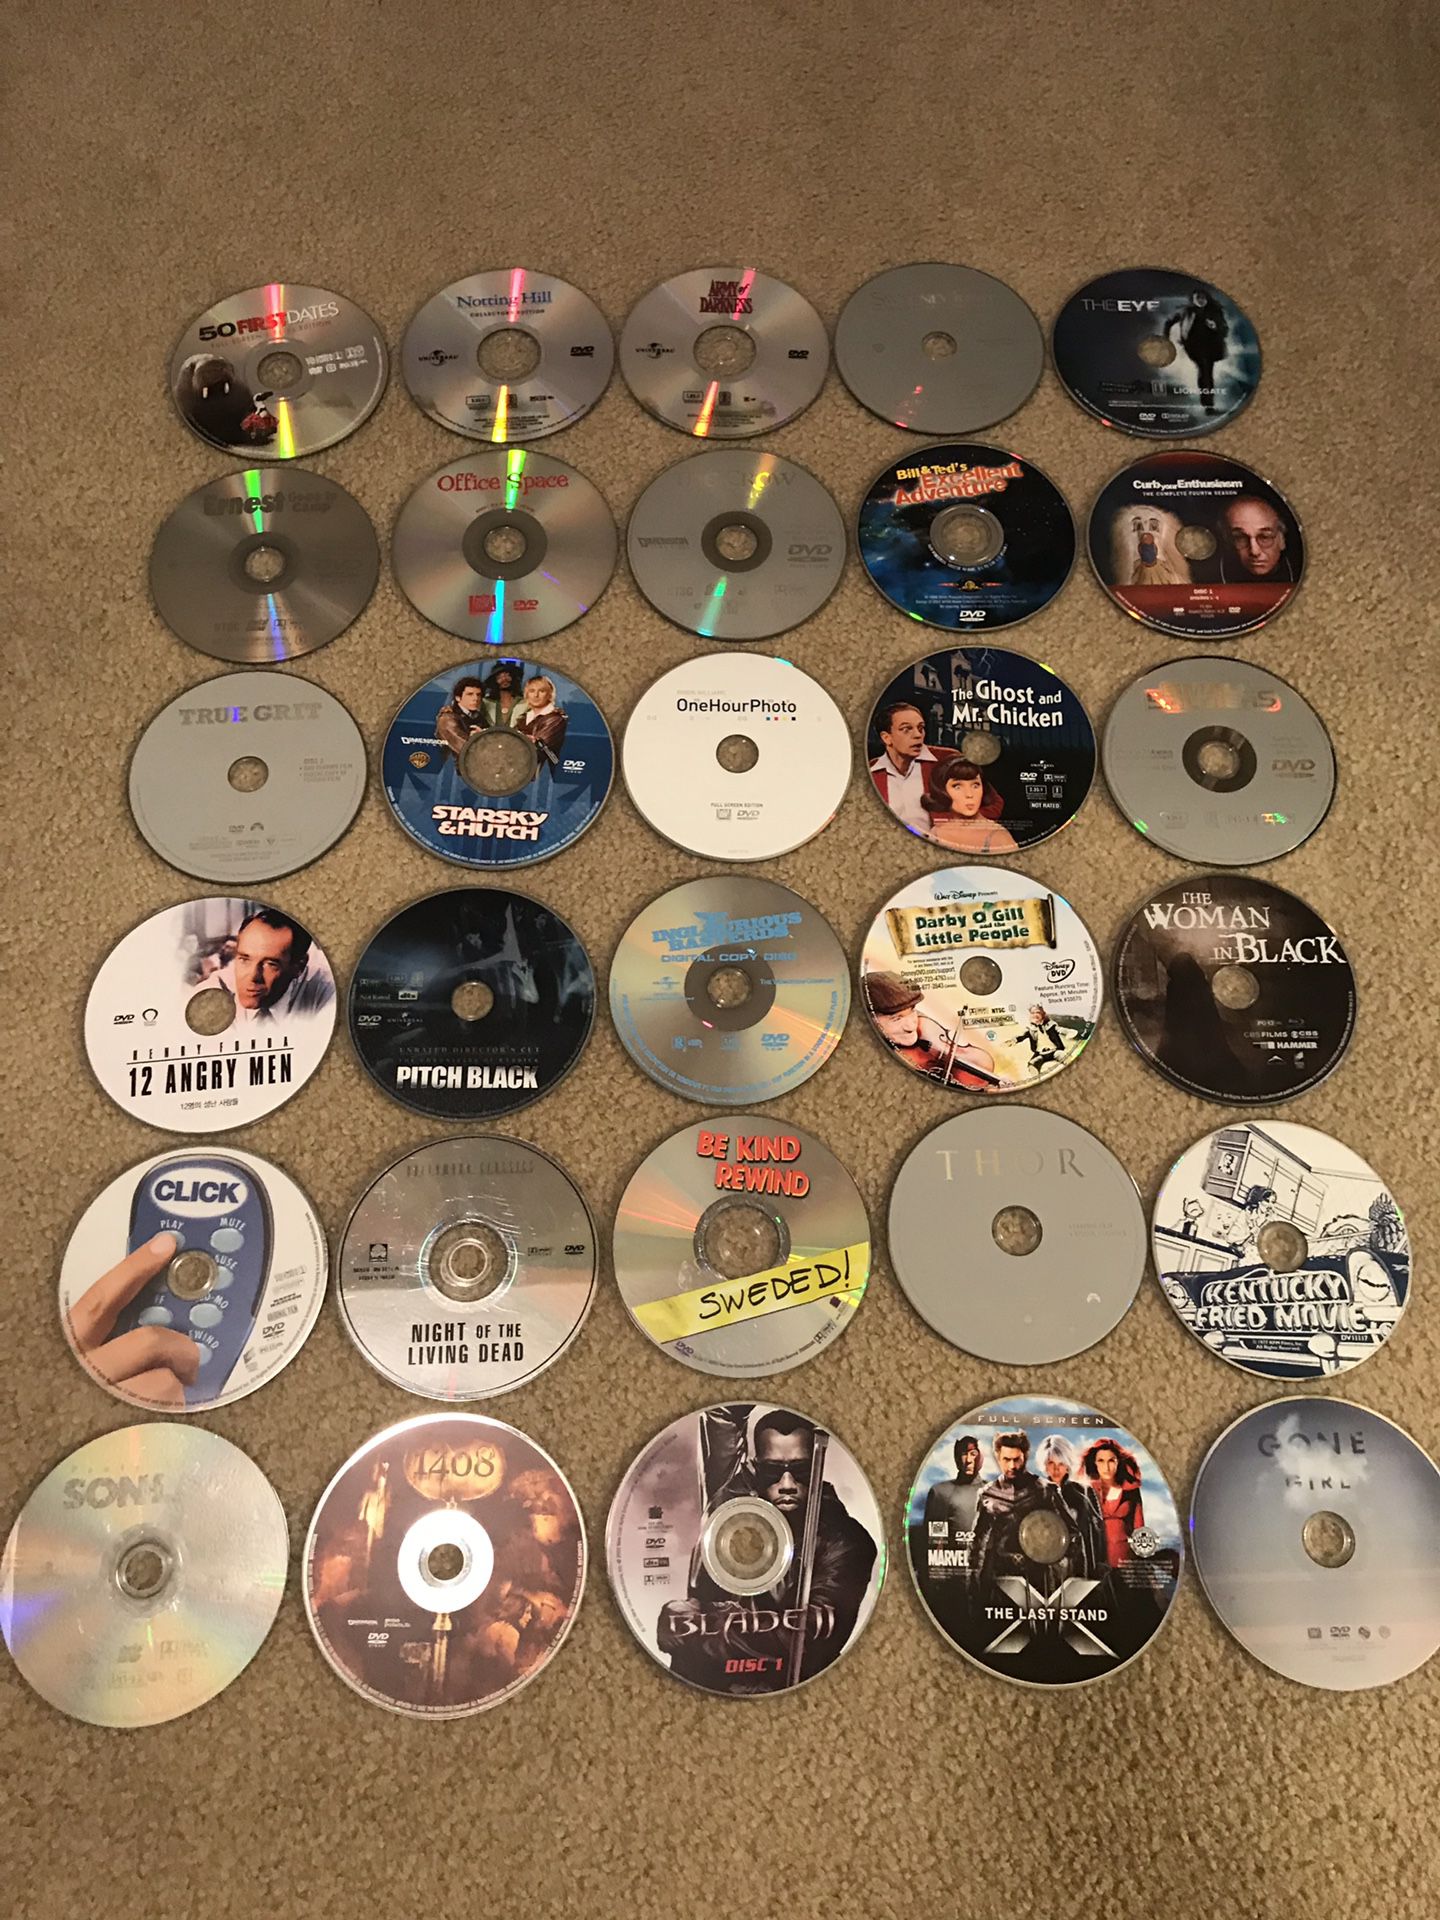 DVD’s (we had stored in a book) no cases